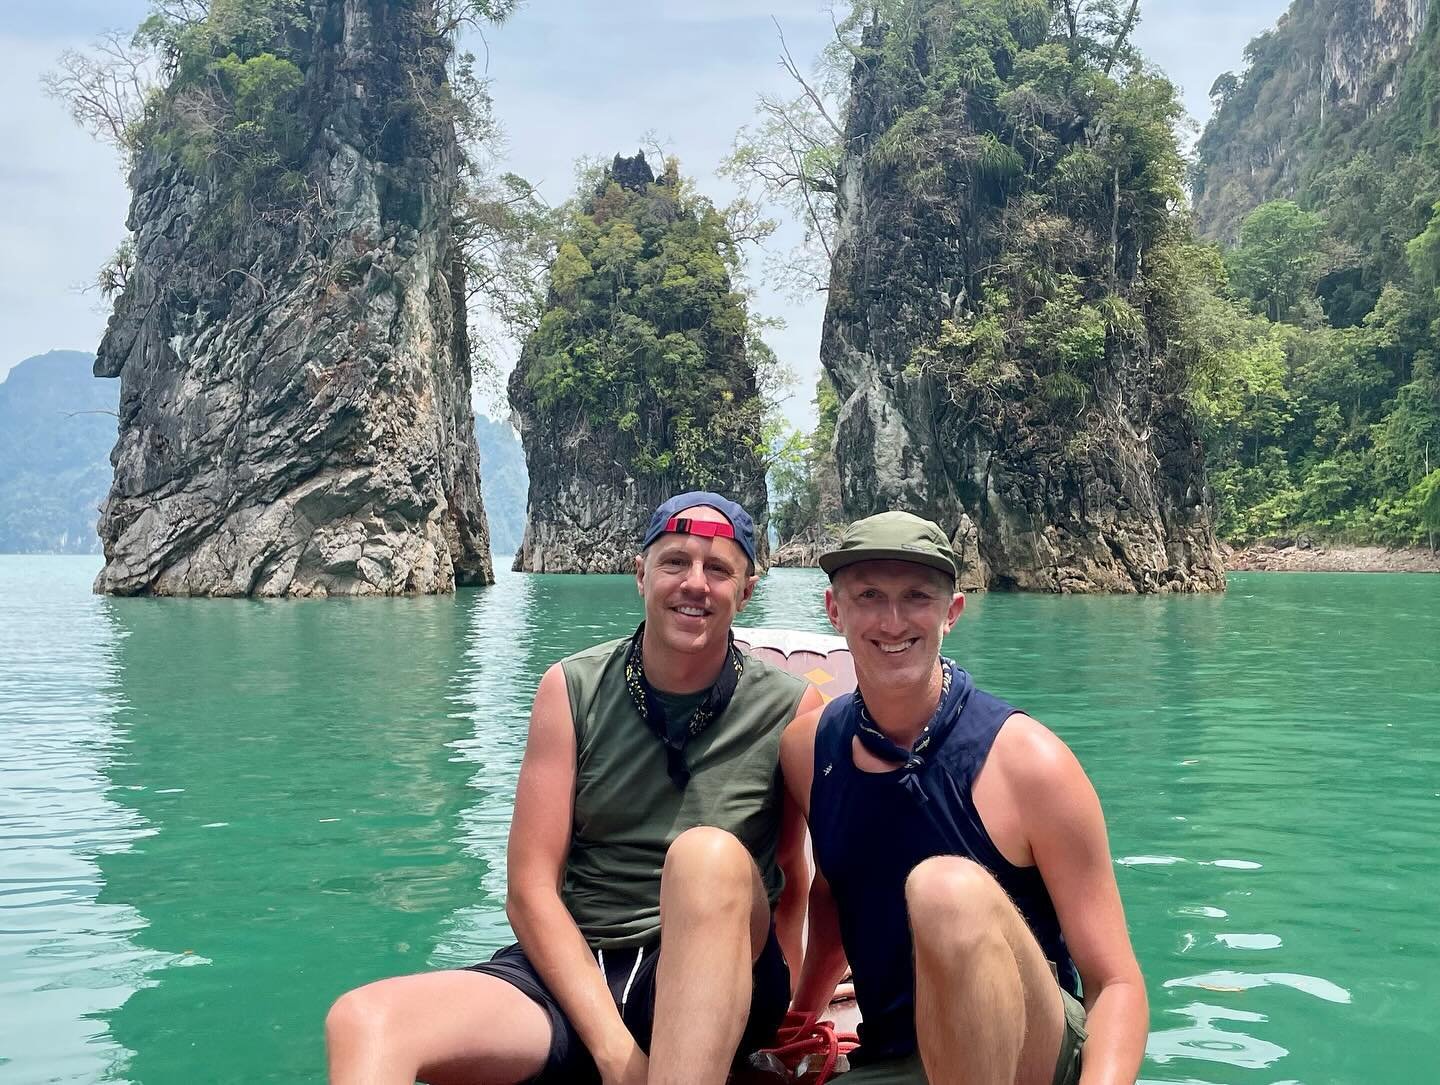 Khao Sok National Park. The last adventure before our final night in Bangkok where we witnessed monkeys playing at our hotel, took a night trek in the jungle and saw all sorts of critters, and spent a day on Cheow Lan Lake surrounded by dramatic lime